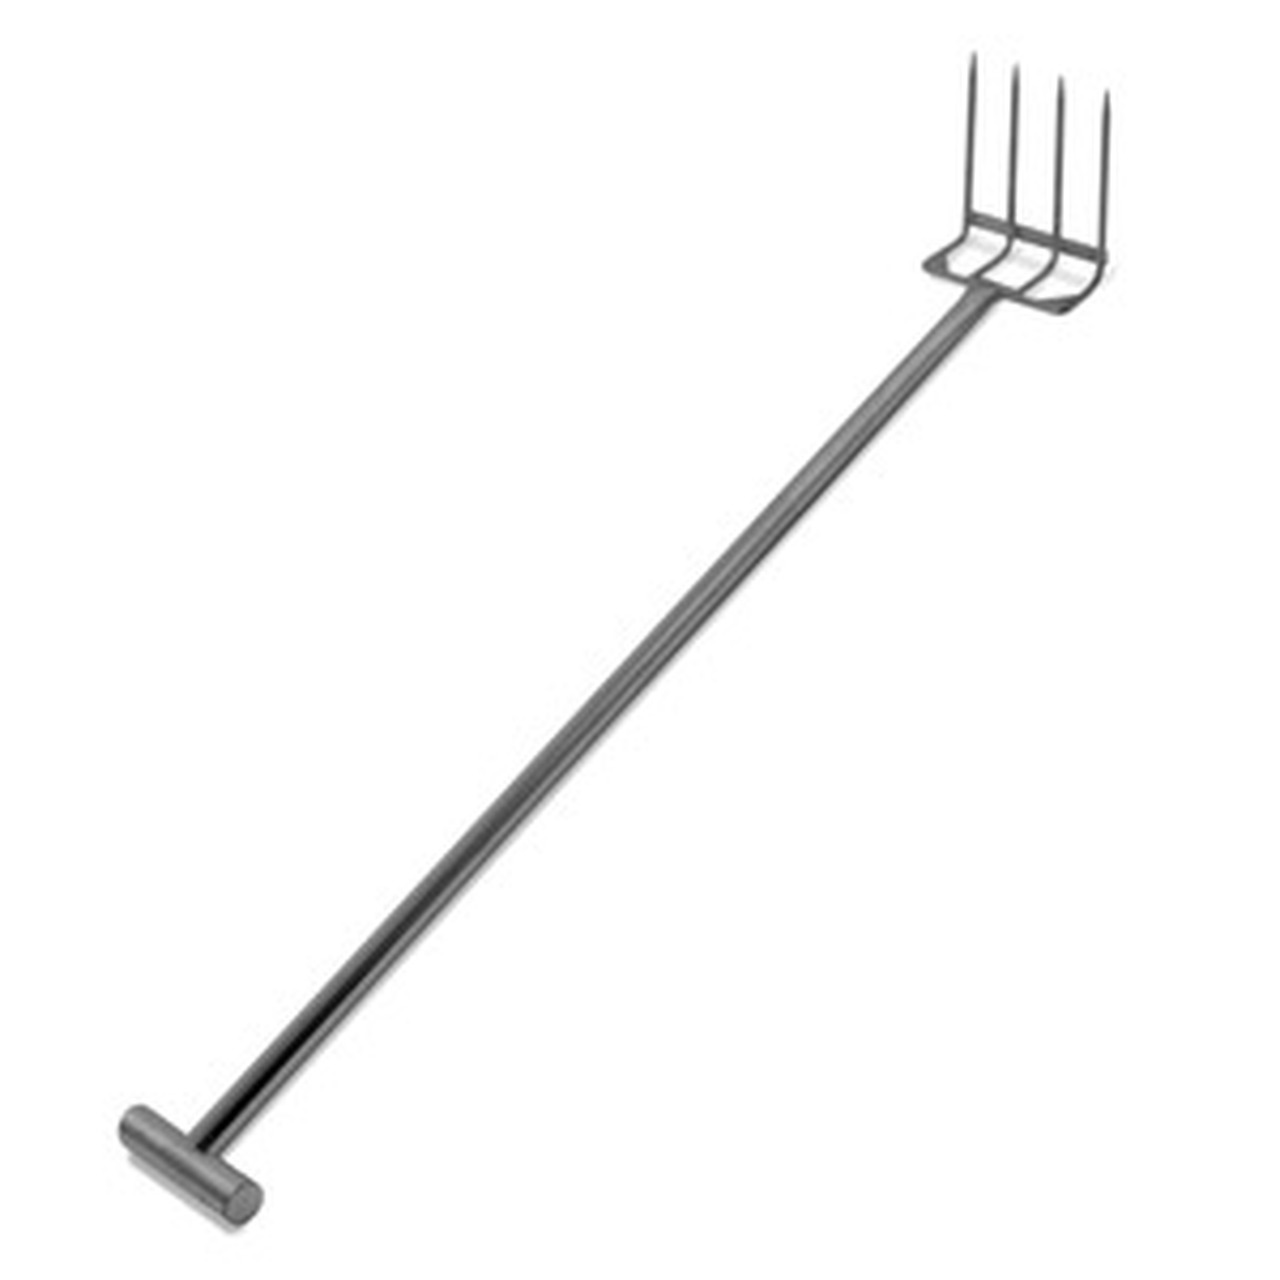 Reinforced Stainless Steel Drag Fork for Meat Processing